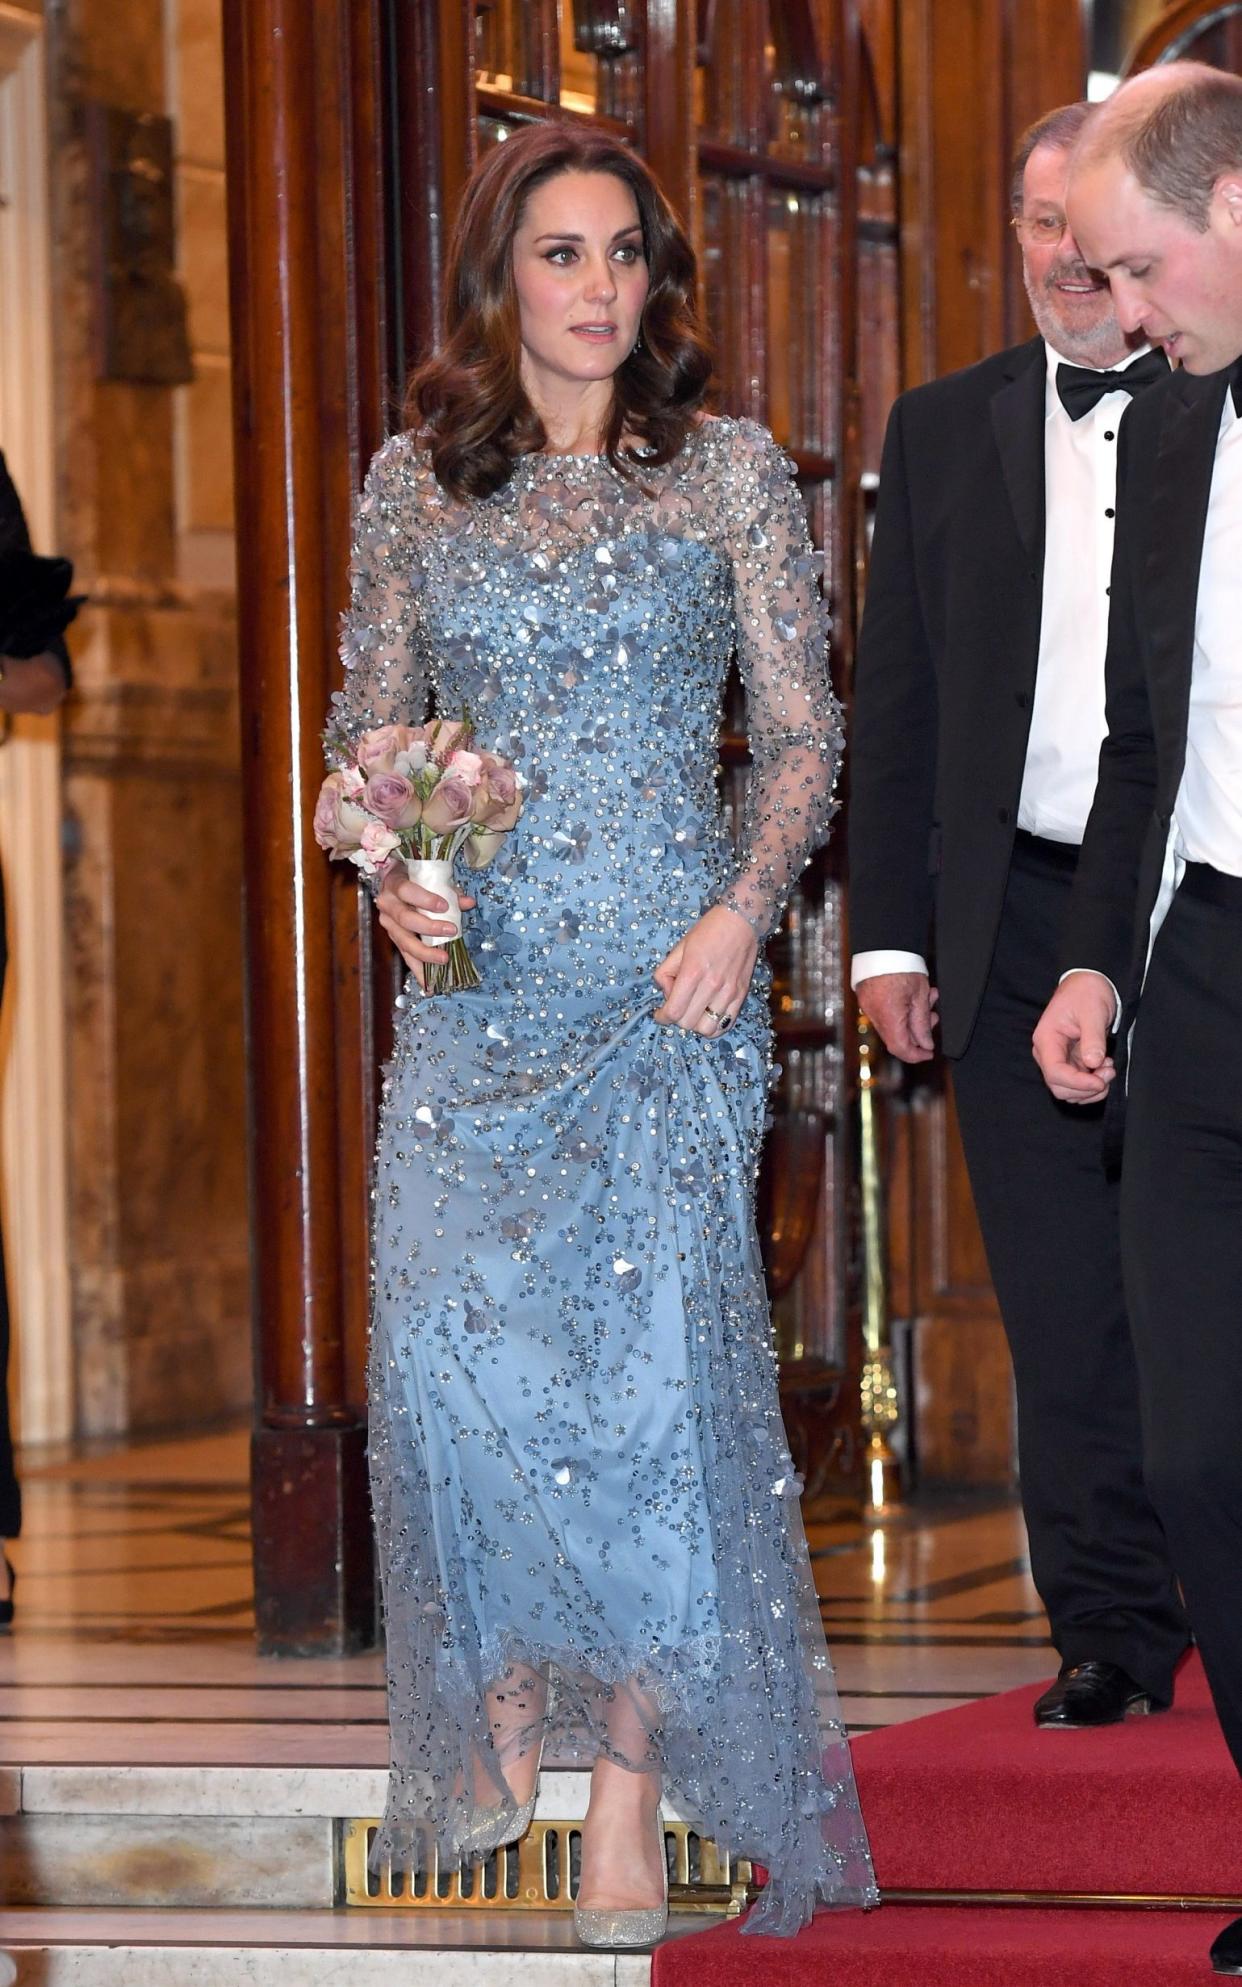 The Duchess of Cambridge at the Royal Variety performance. - WireImage